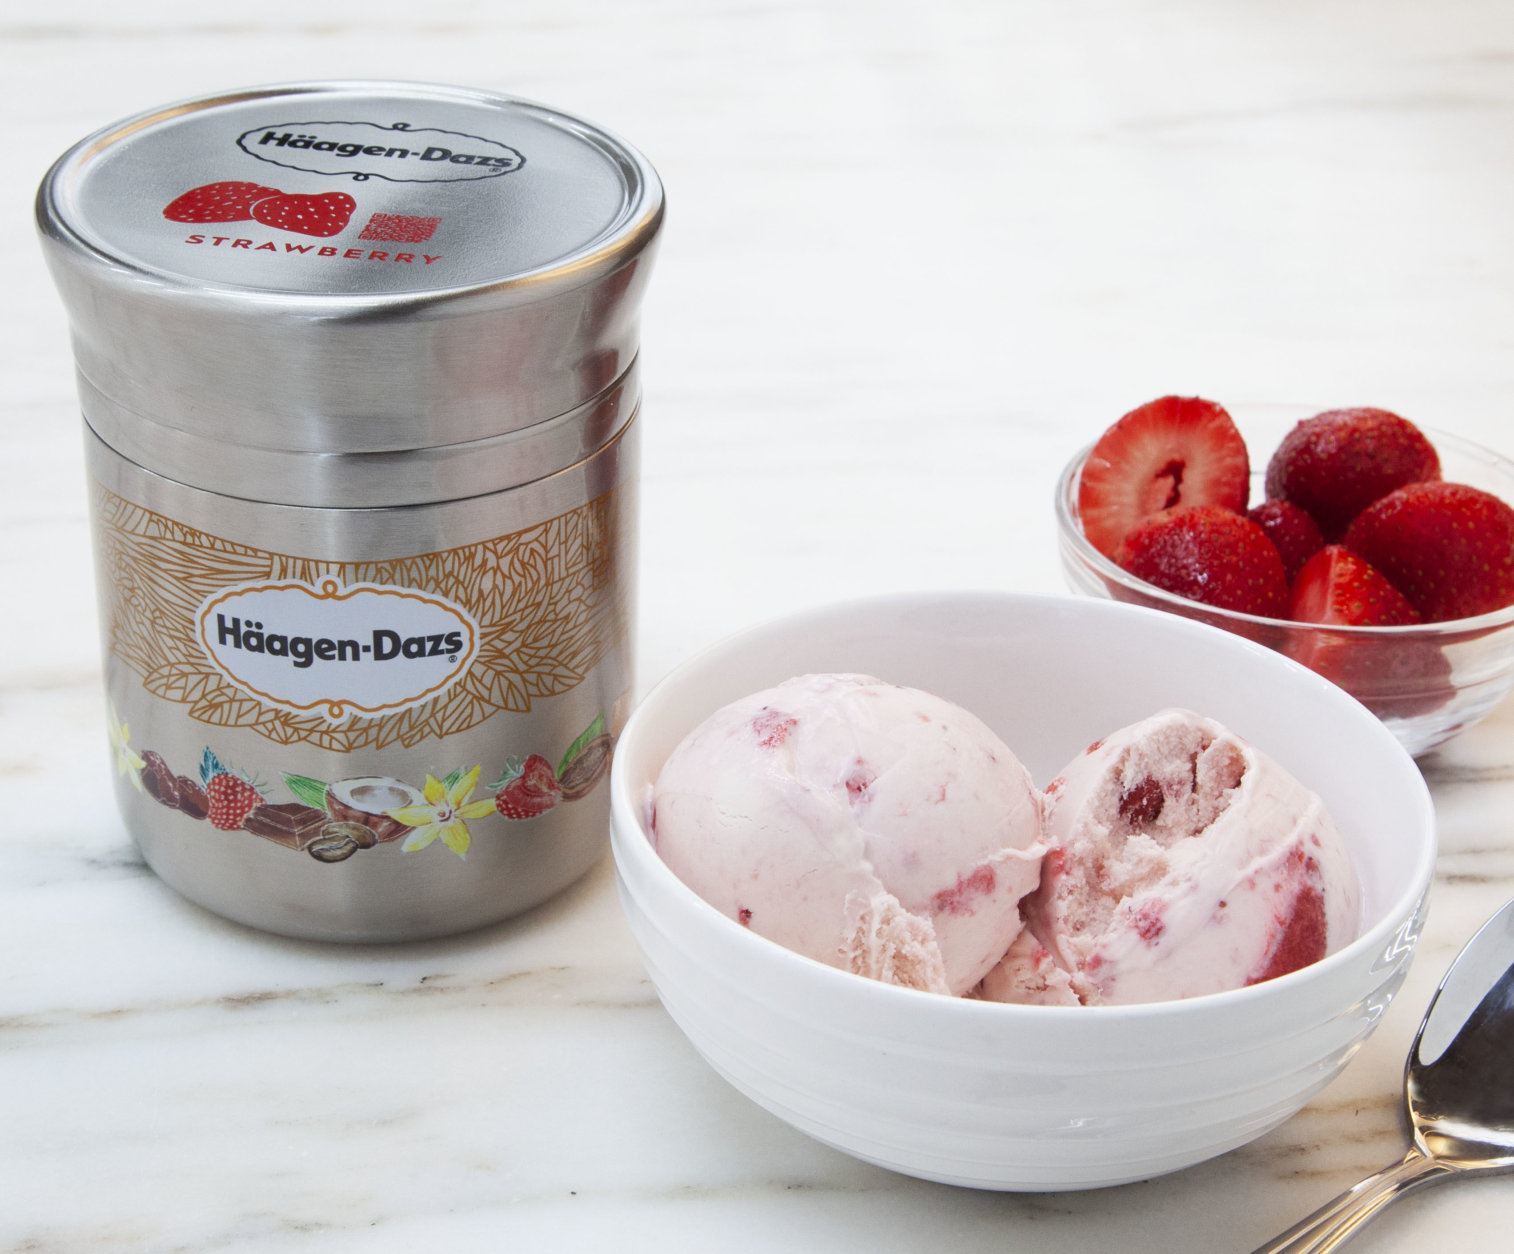 Häagen-Dazs ice cream is one of the products you can buy in the Loop store. The ice cream comes in a reusable stainless steel, double-wall container. (Courtesy Loop) 